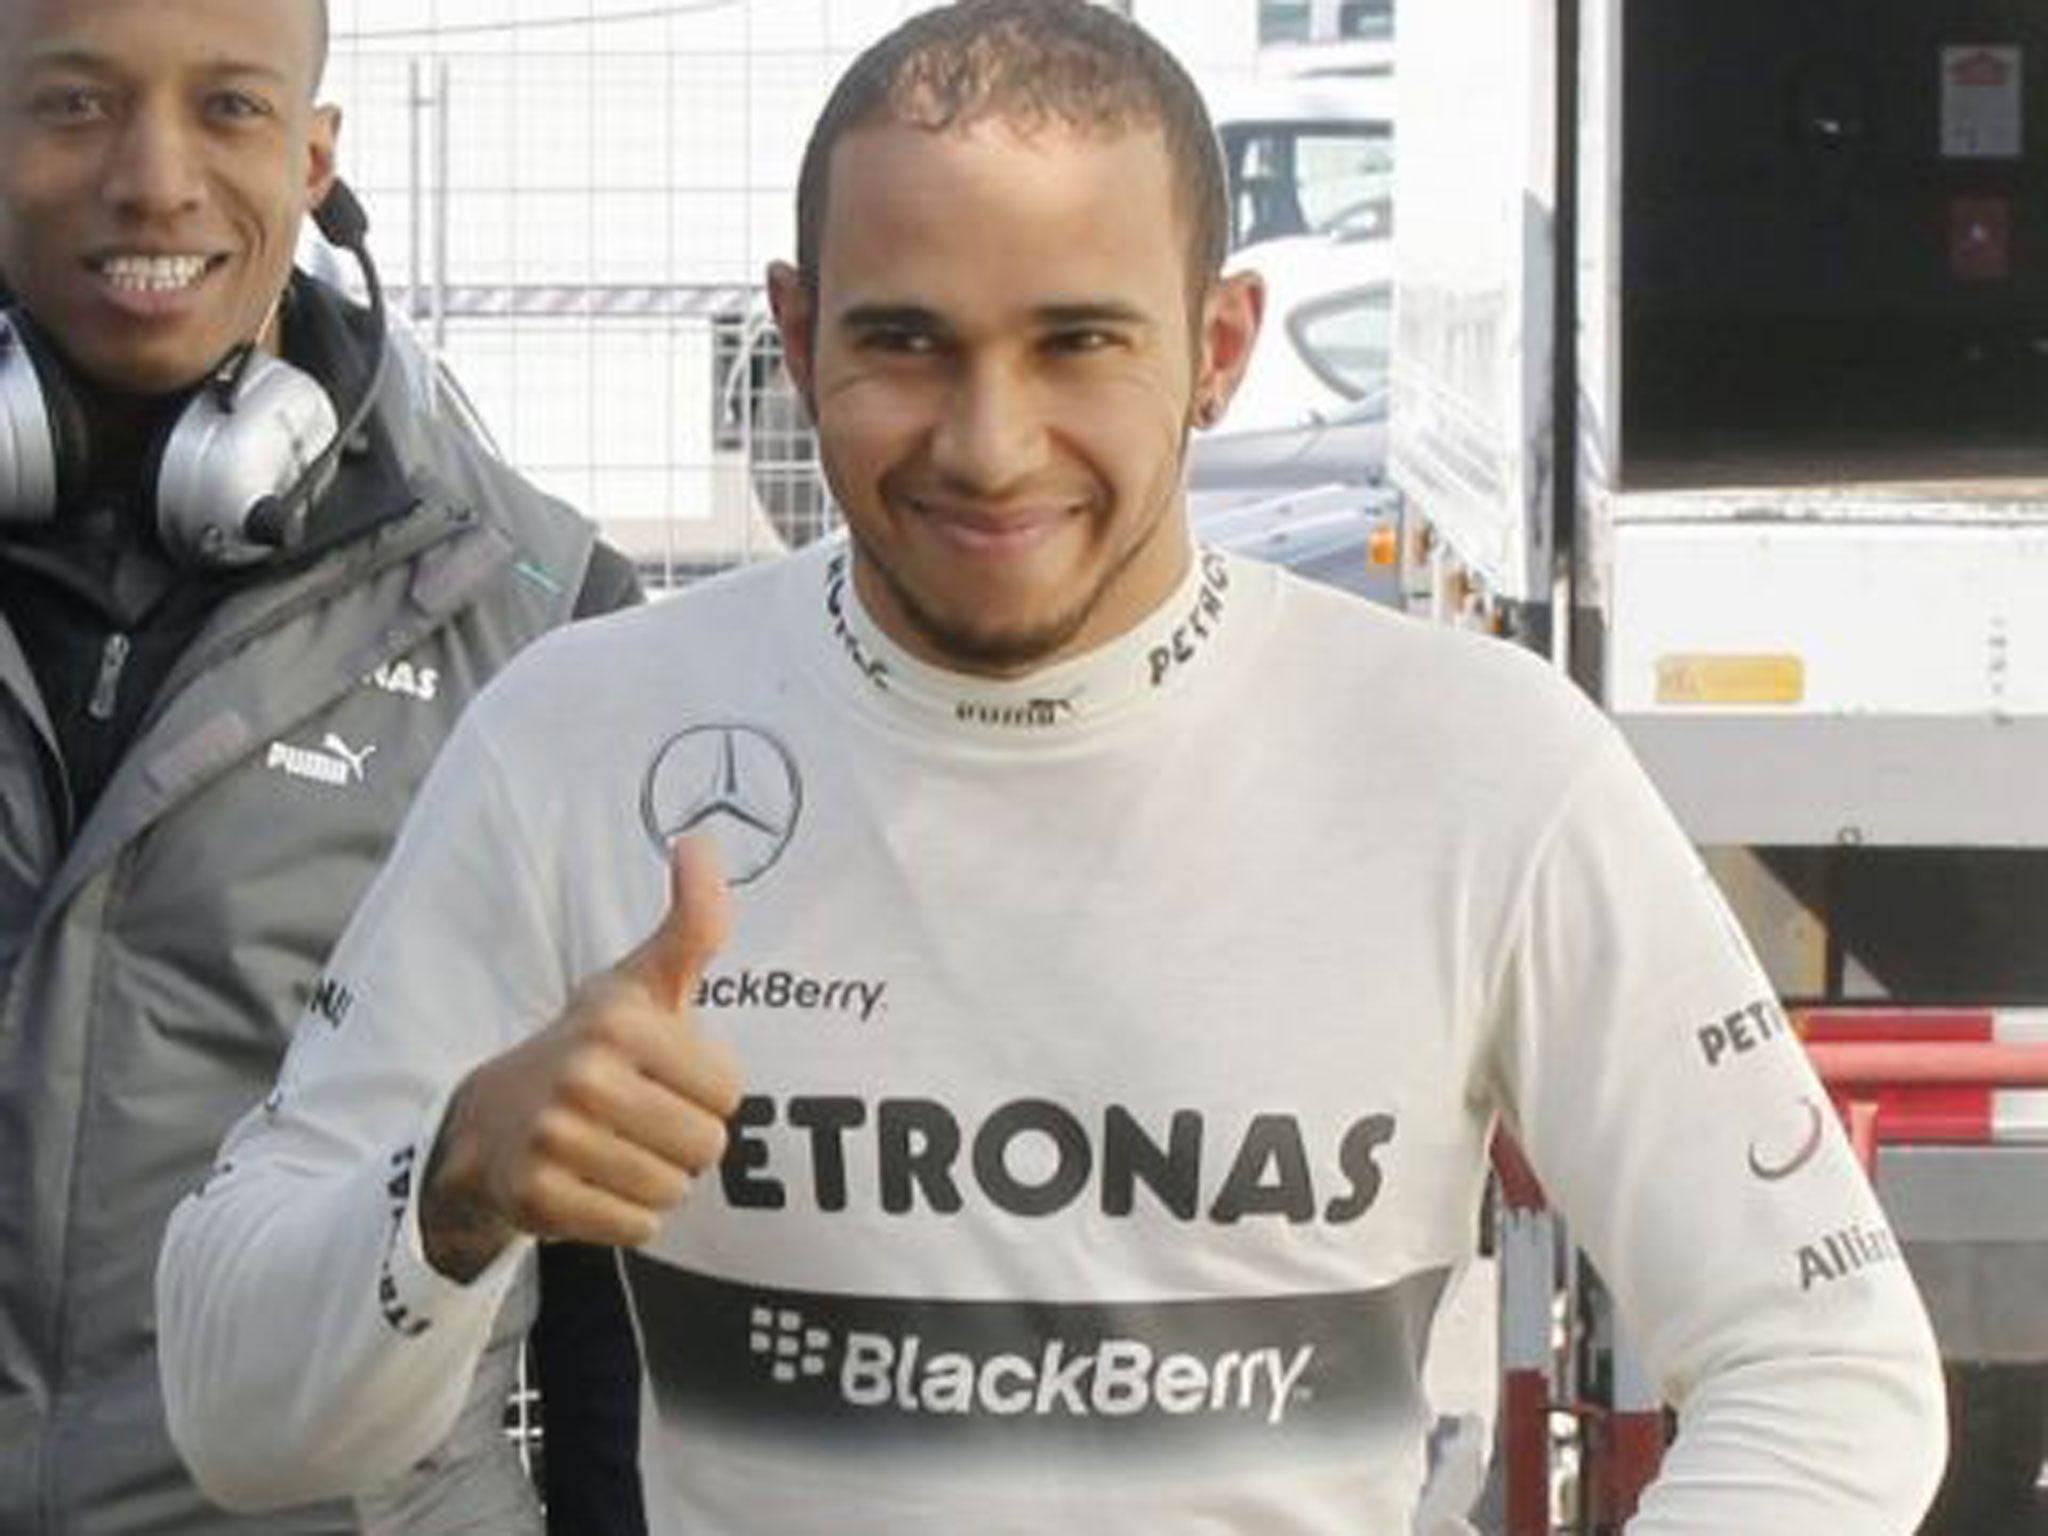 Lewis Hamilton says he is “massively excited” by his Mercedes’ performance in Melbourne